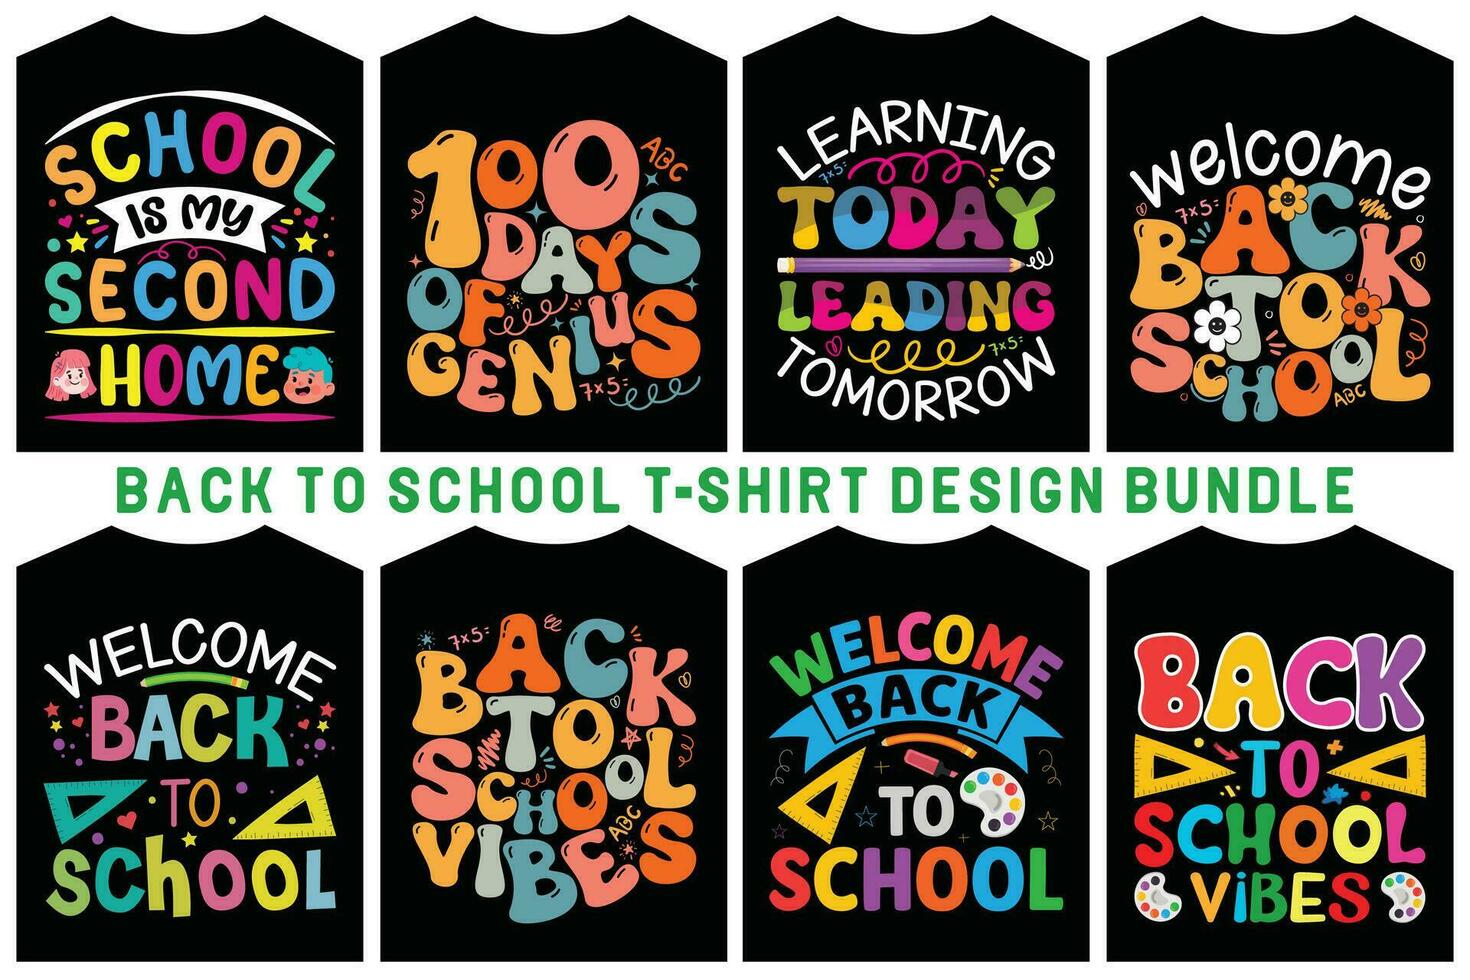 Back to school t-shirts design Typography back to school t-shirt design vector